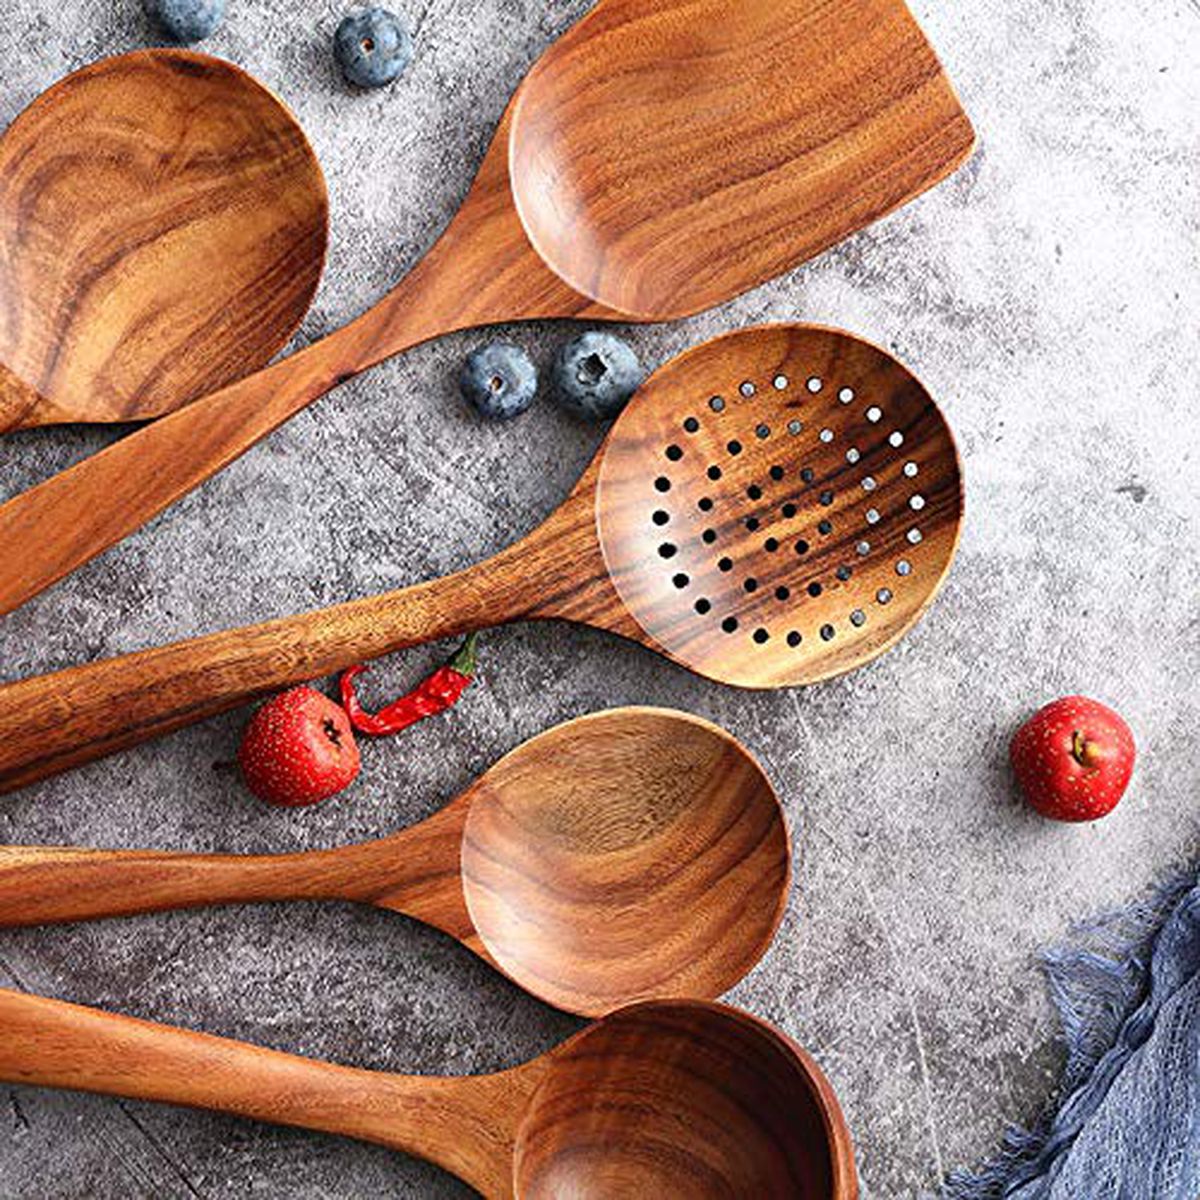 Wooden kitchen utensils on a gray surface.